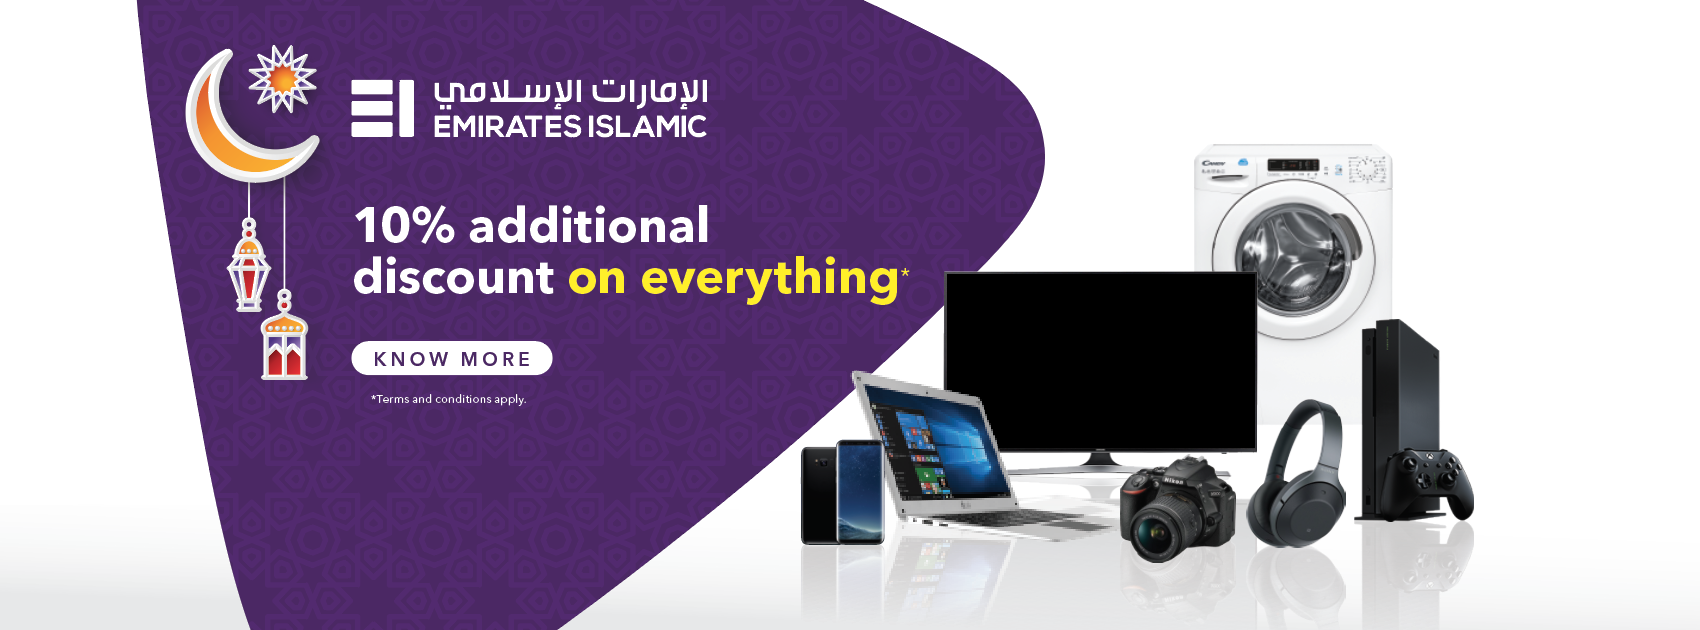 Emirates-Islamic-10% Additional-Discount-On-Electronic-Items